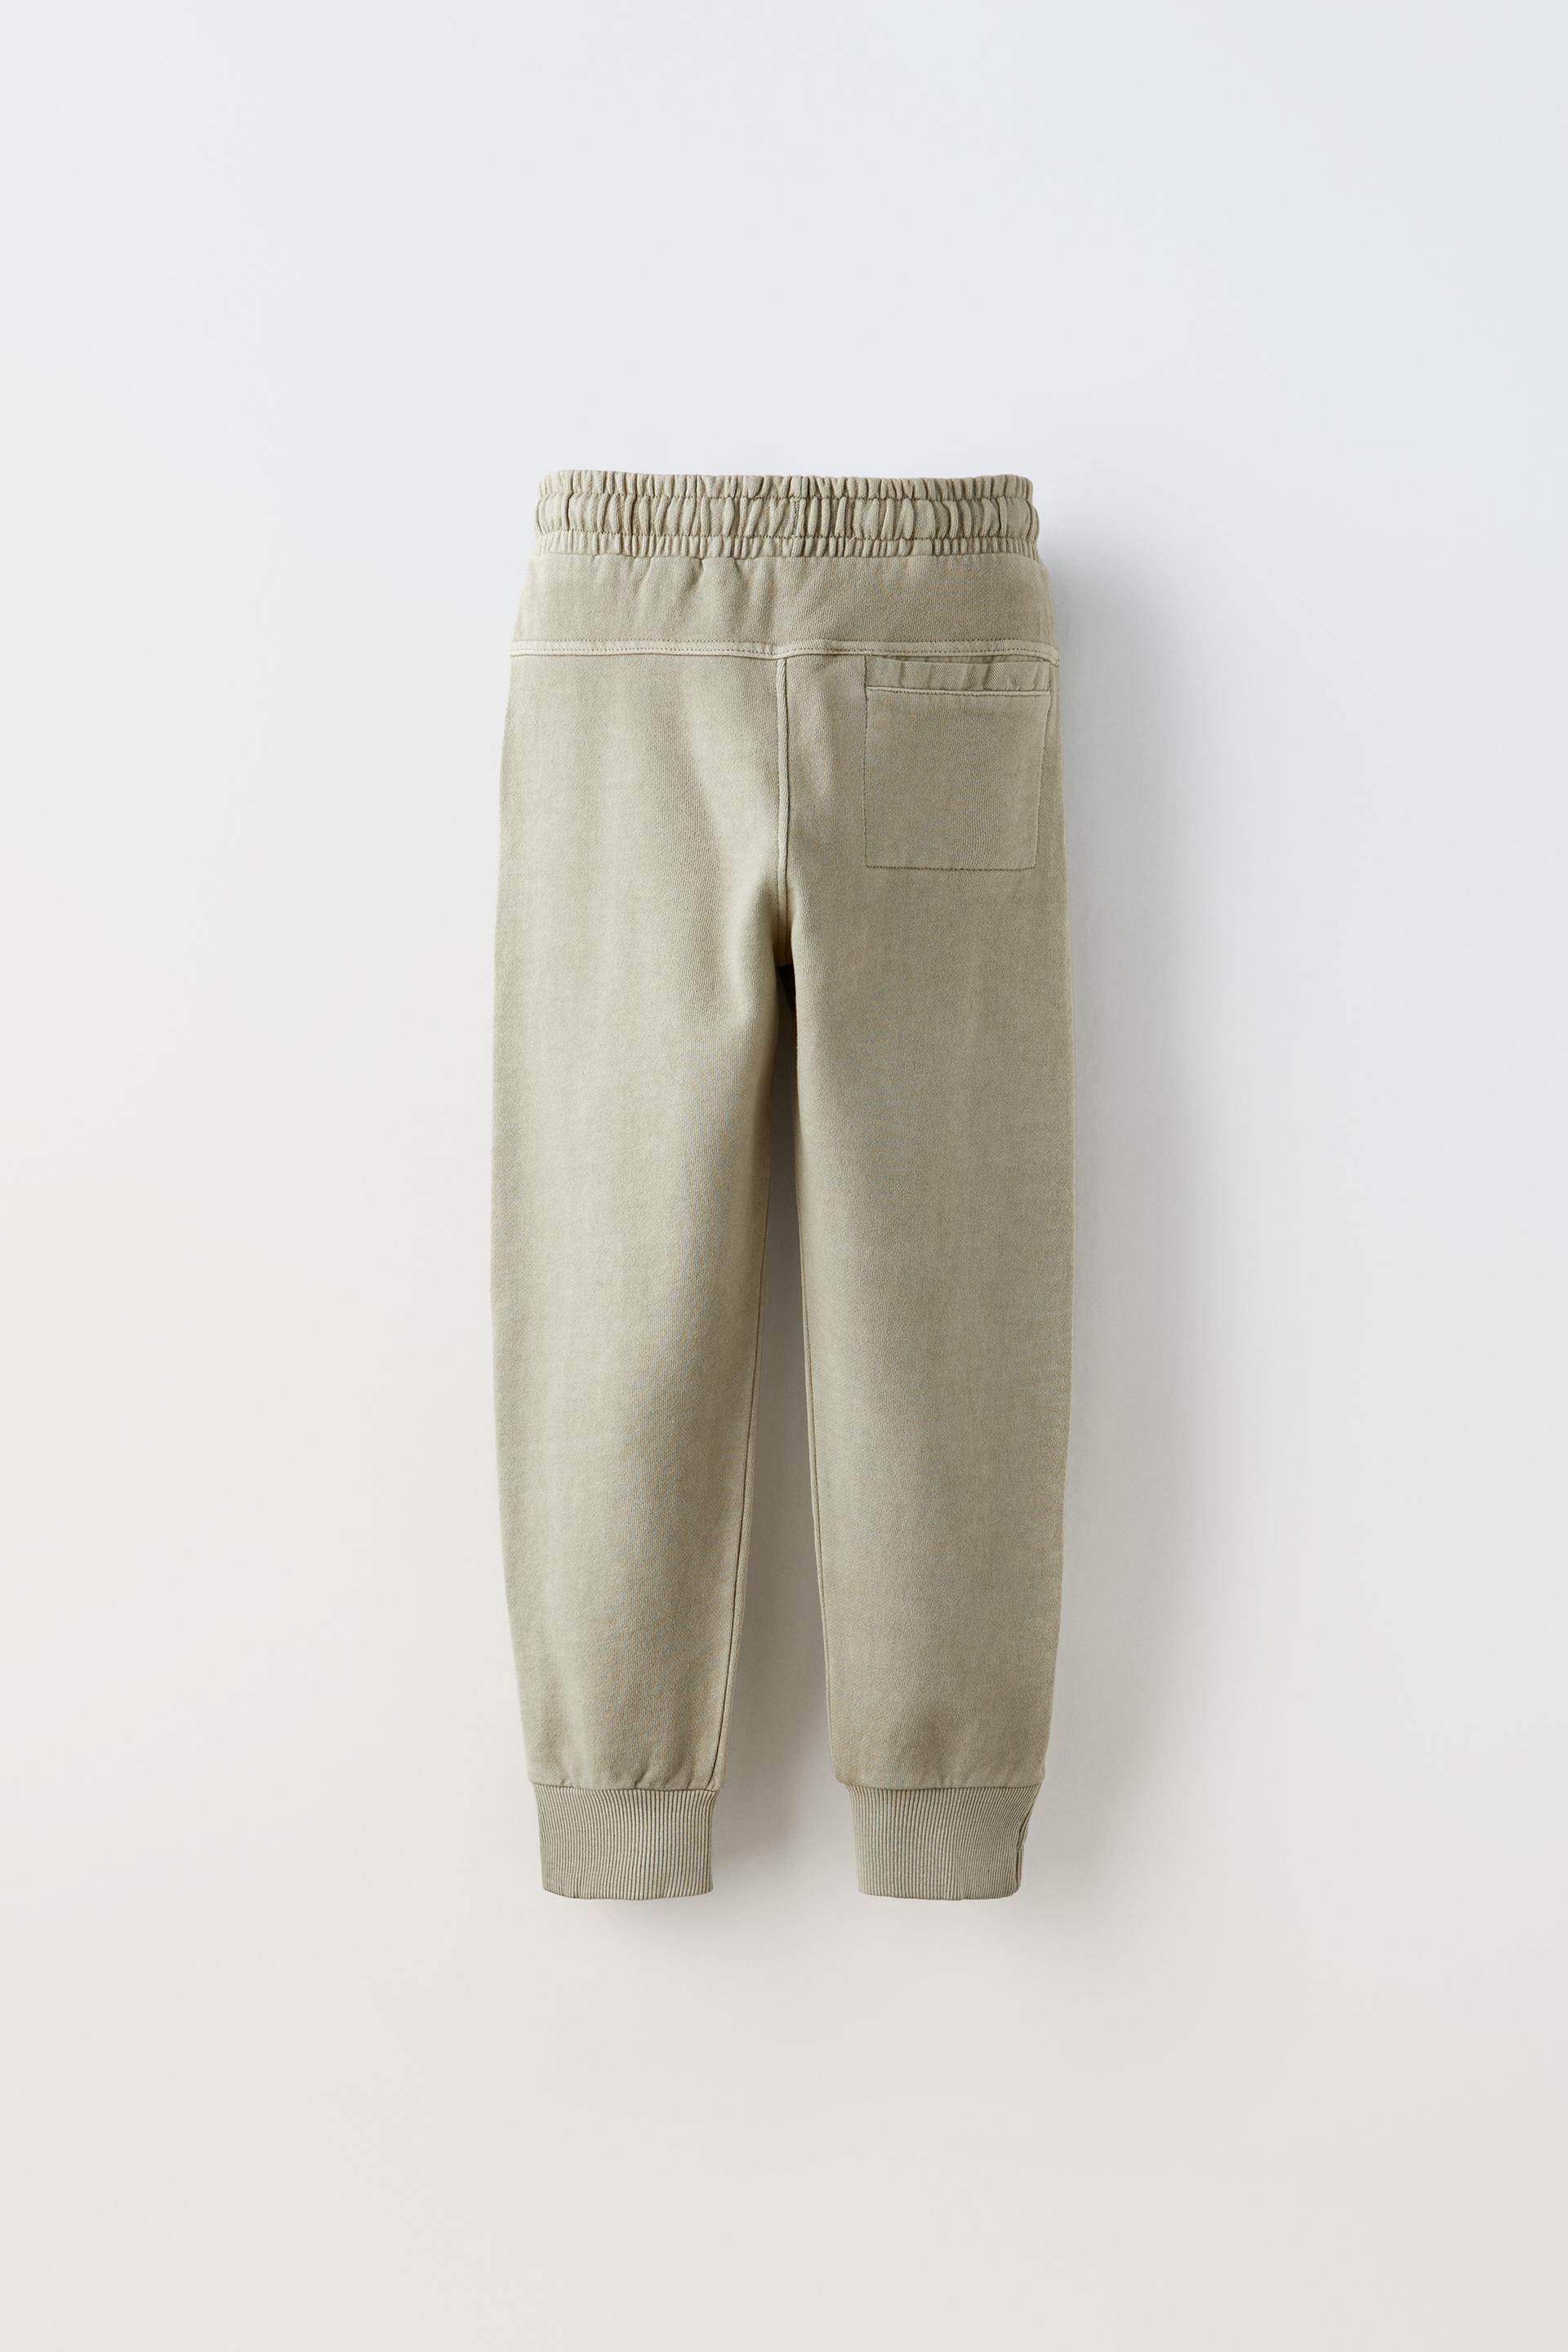 PLUSH PANTS WITH ZIPPERS - Brown / Taupe